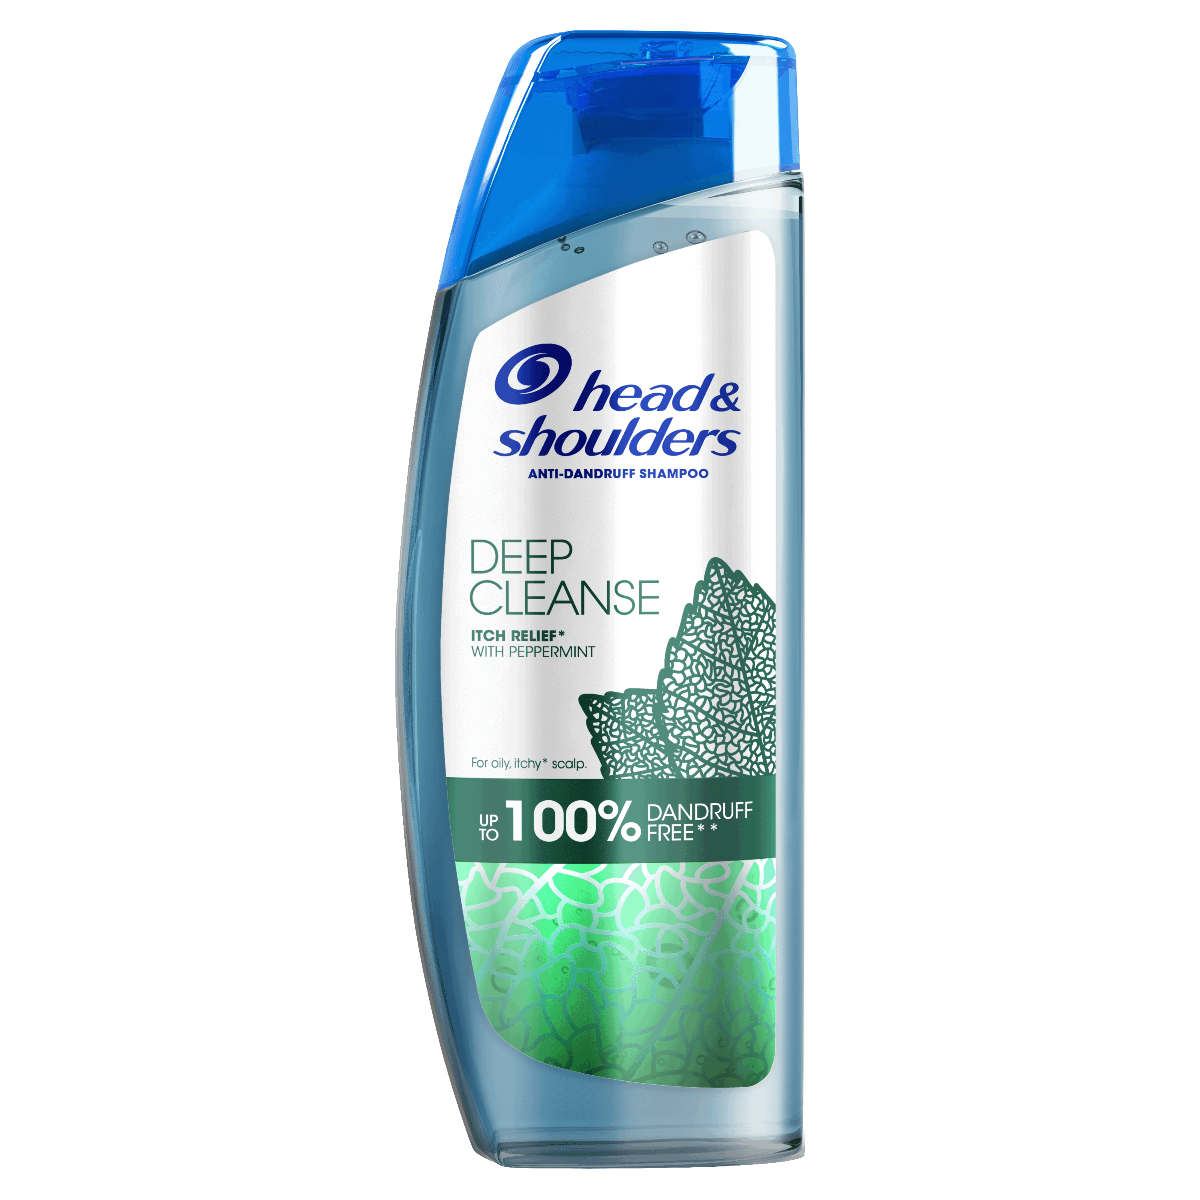 Head  Shoulders Deep cleanse 300ml Itch relief